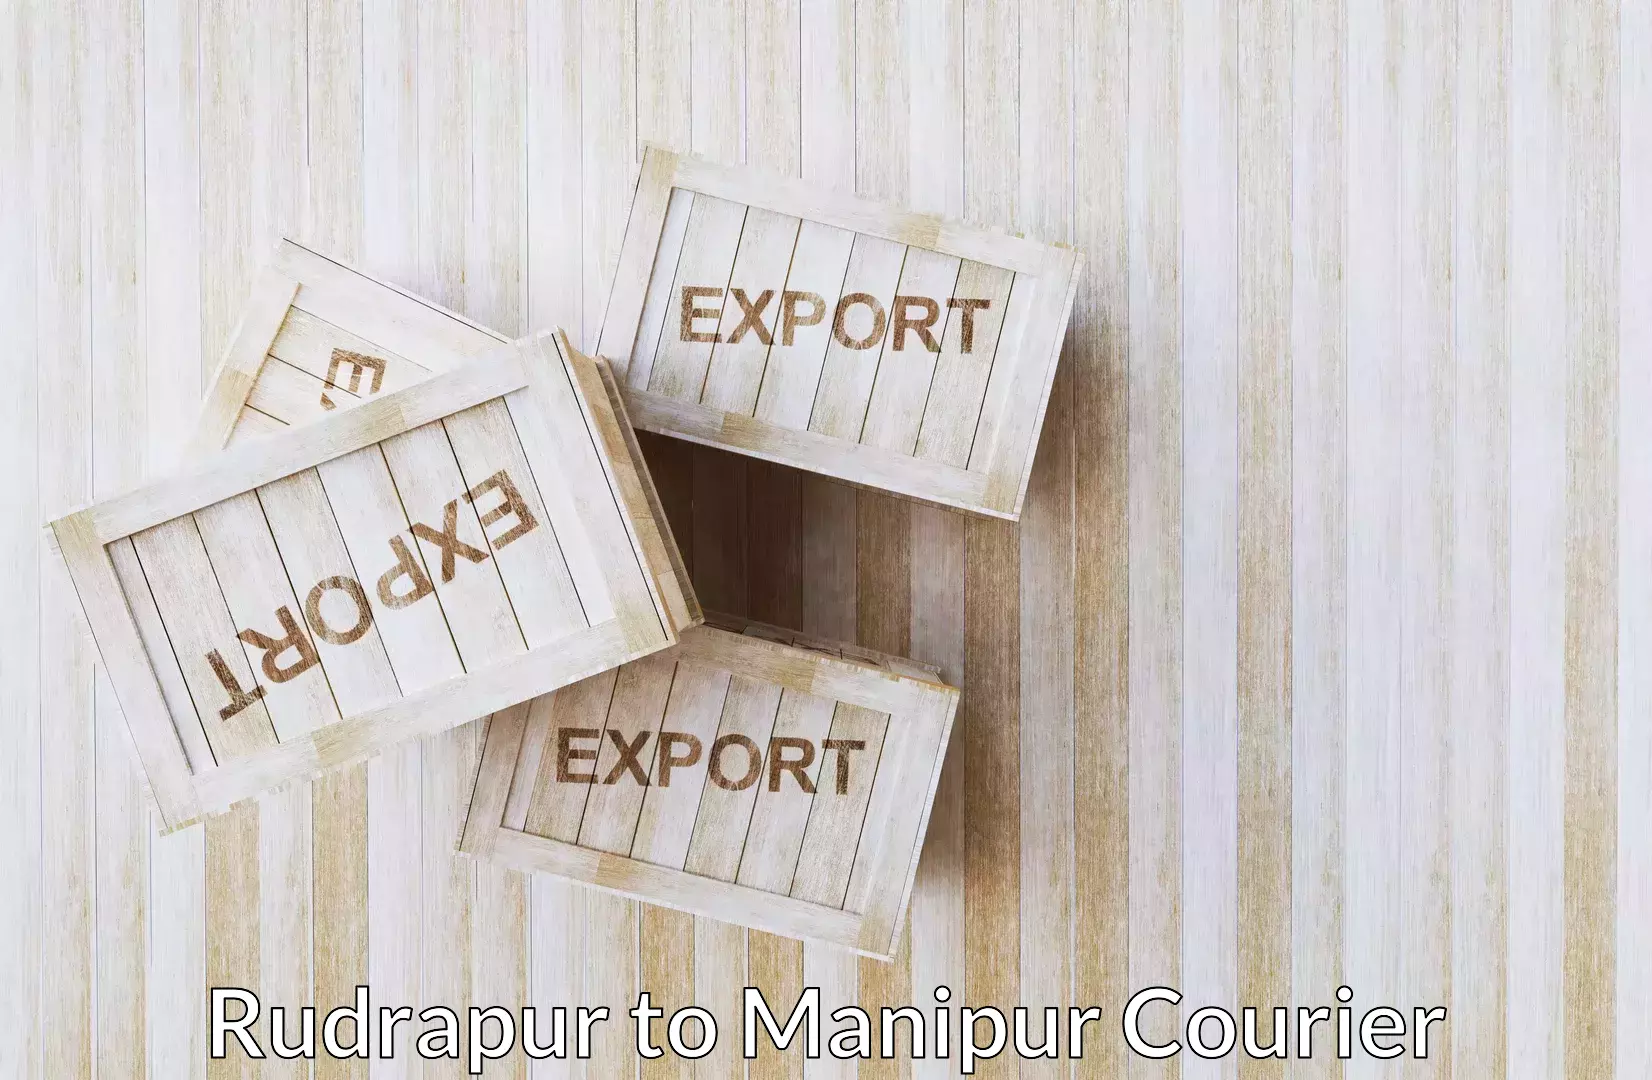 Baggage transport network Rudrapur to Manipur